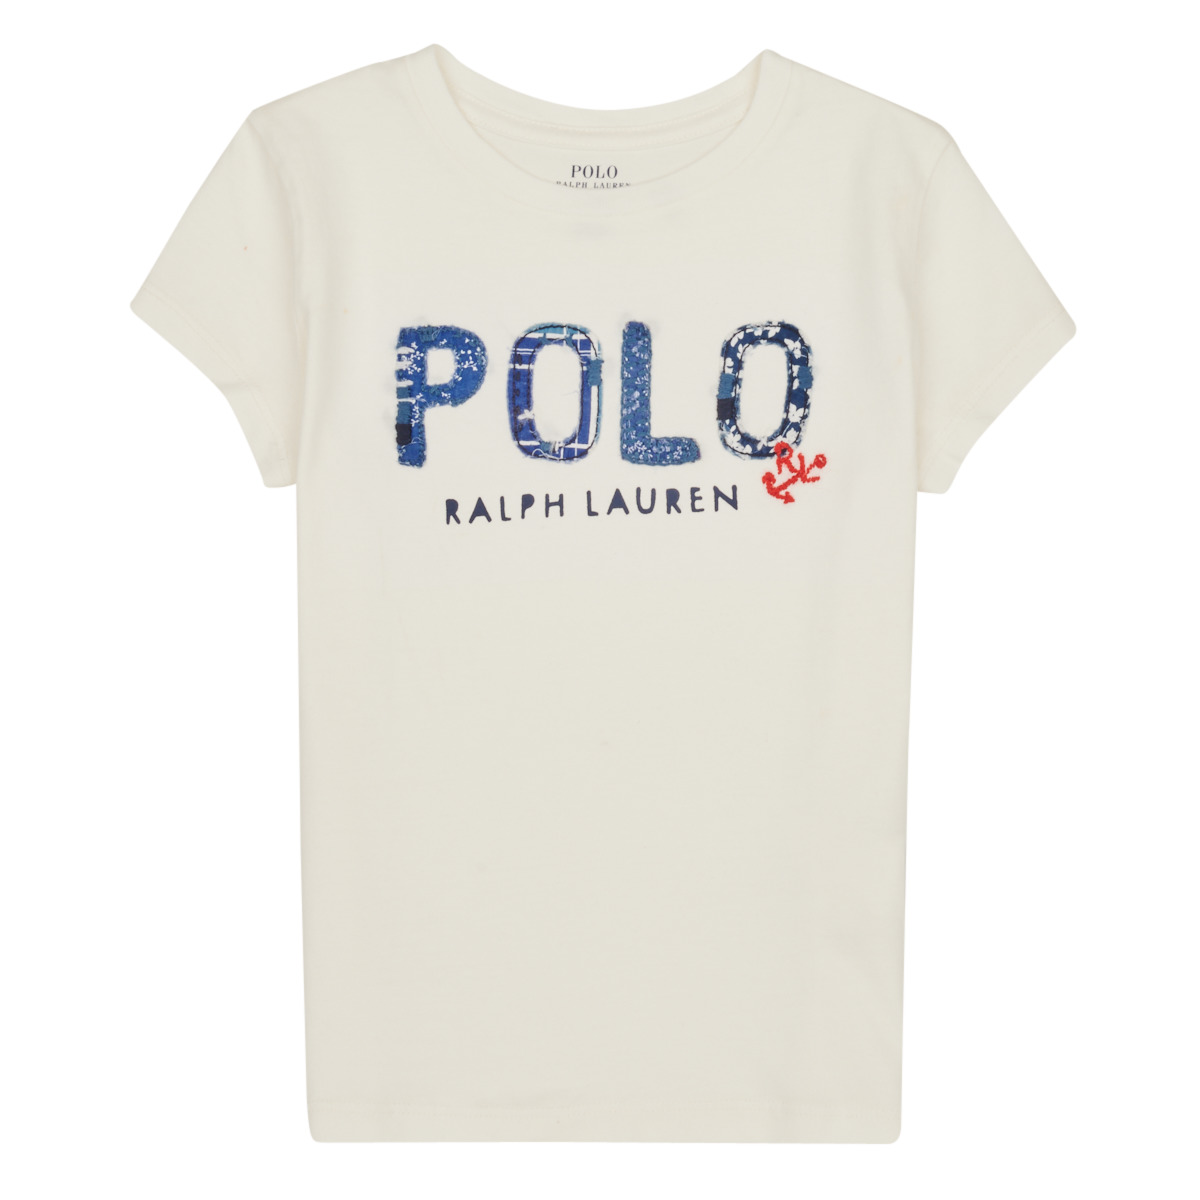 Polo Ralph Lauren Blanc SS POLO TEE-KNIT SHIRTS sLo9vRy